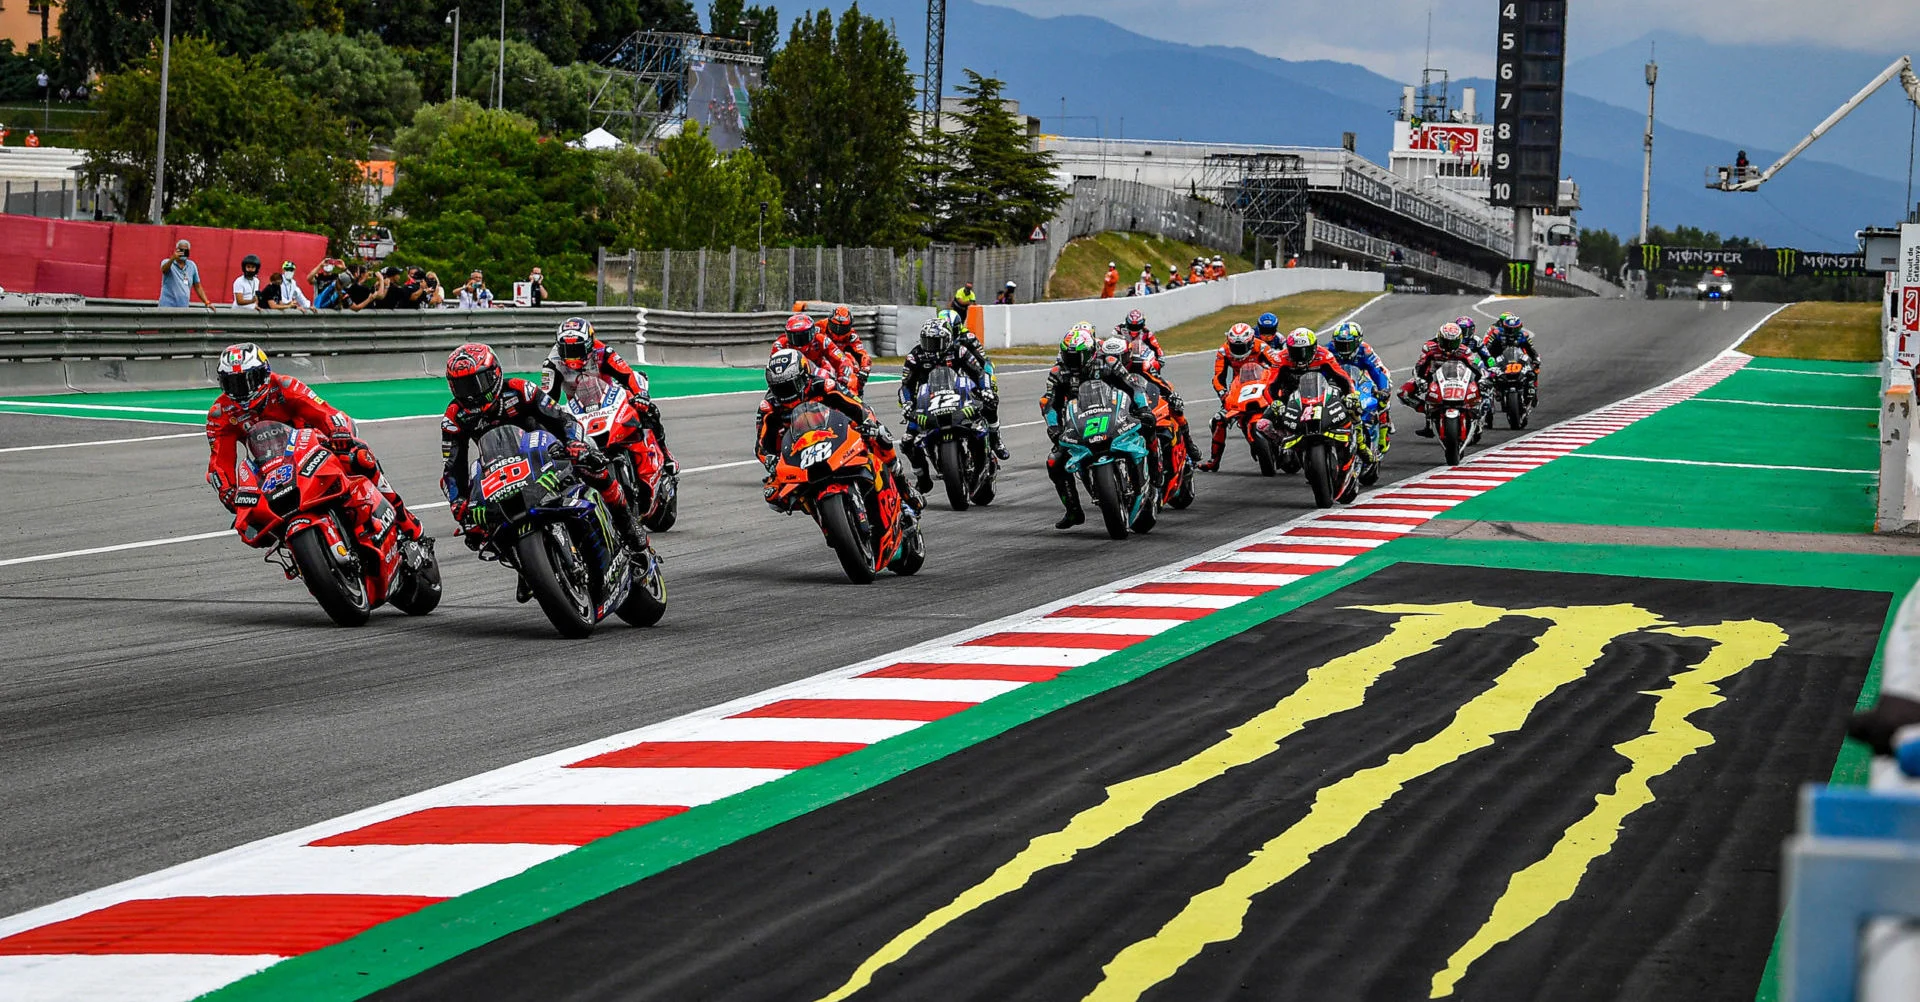 MotoGP 2022 Catalan Grand Prix. How to watch, Standings, Bets and Odds | June 5